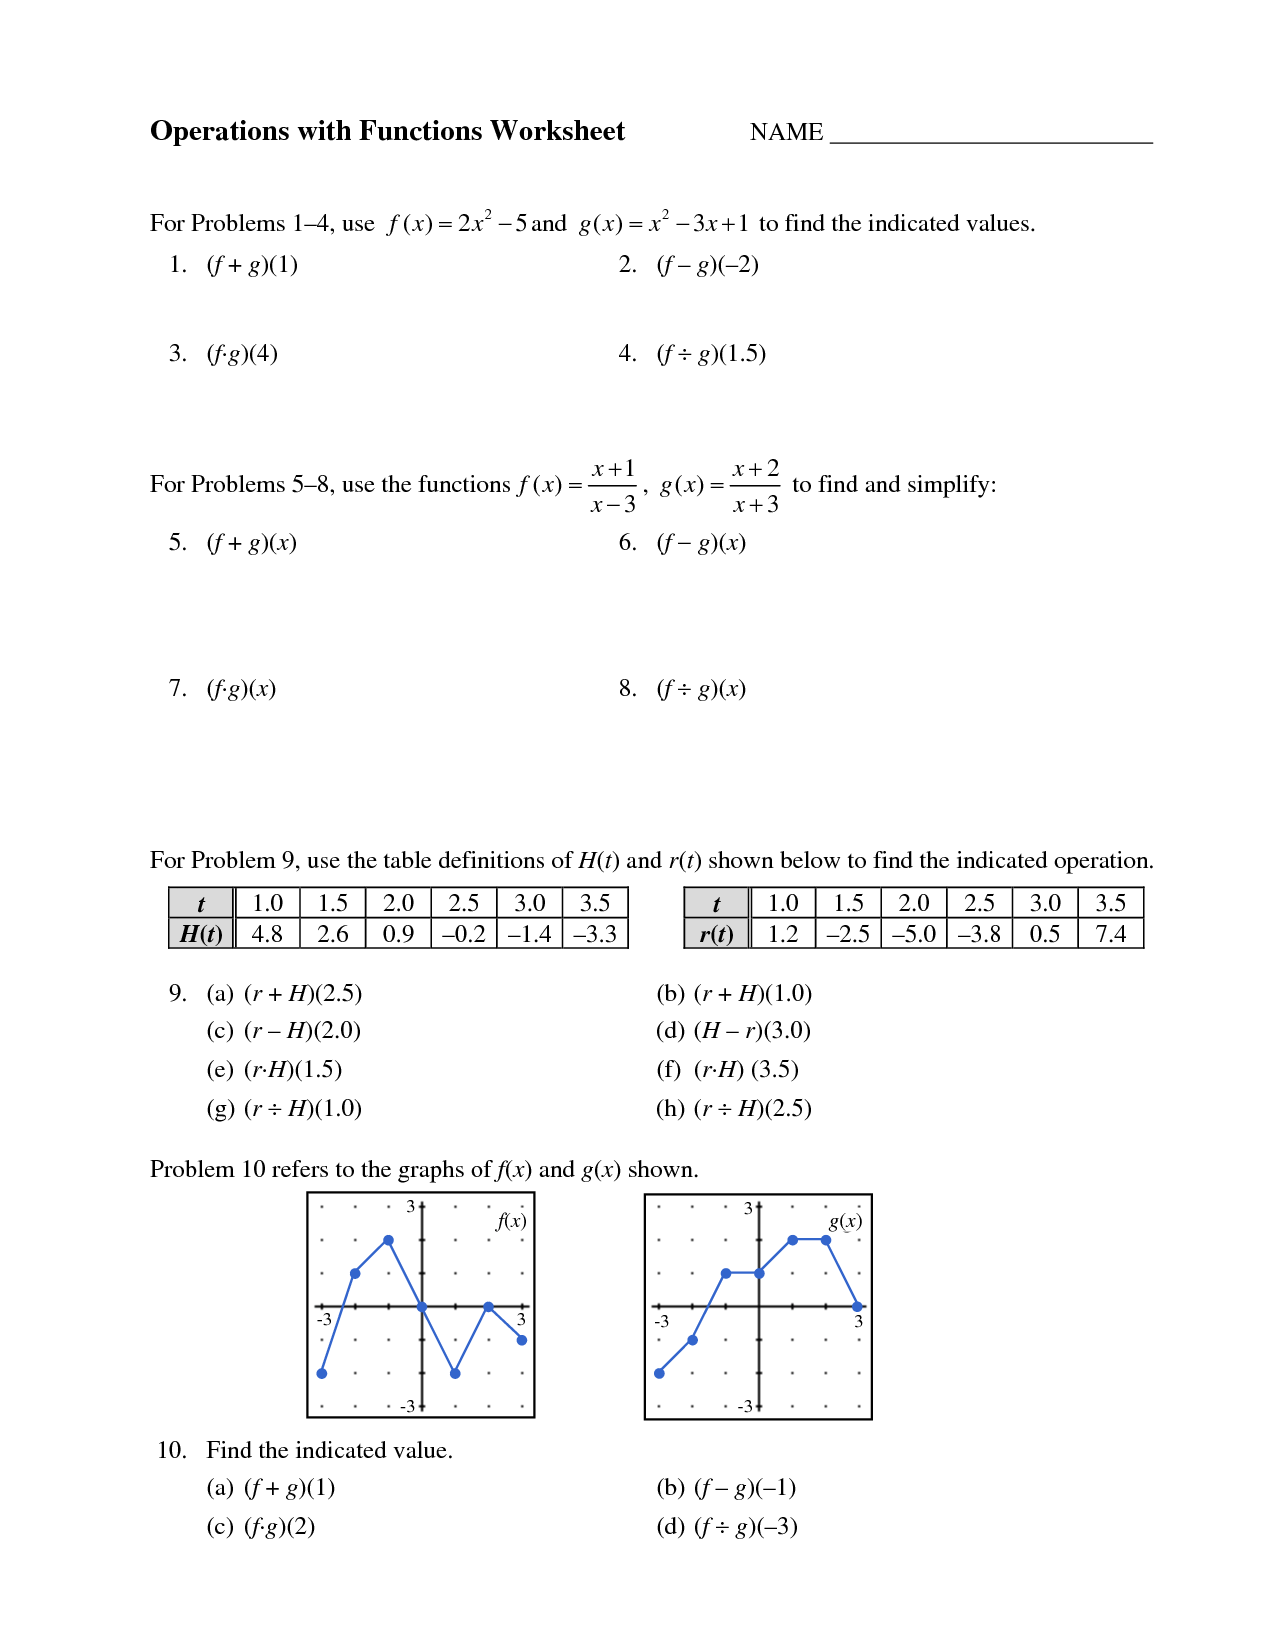 Operations with Functions Worksheet Image